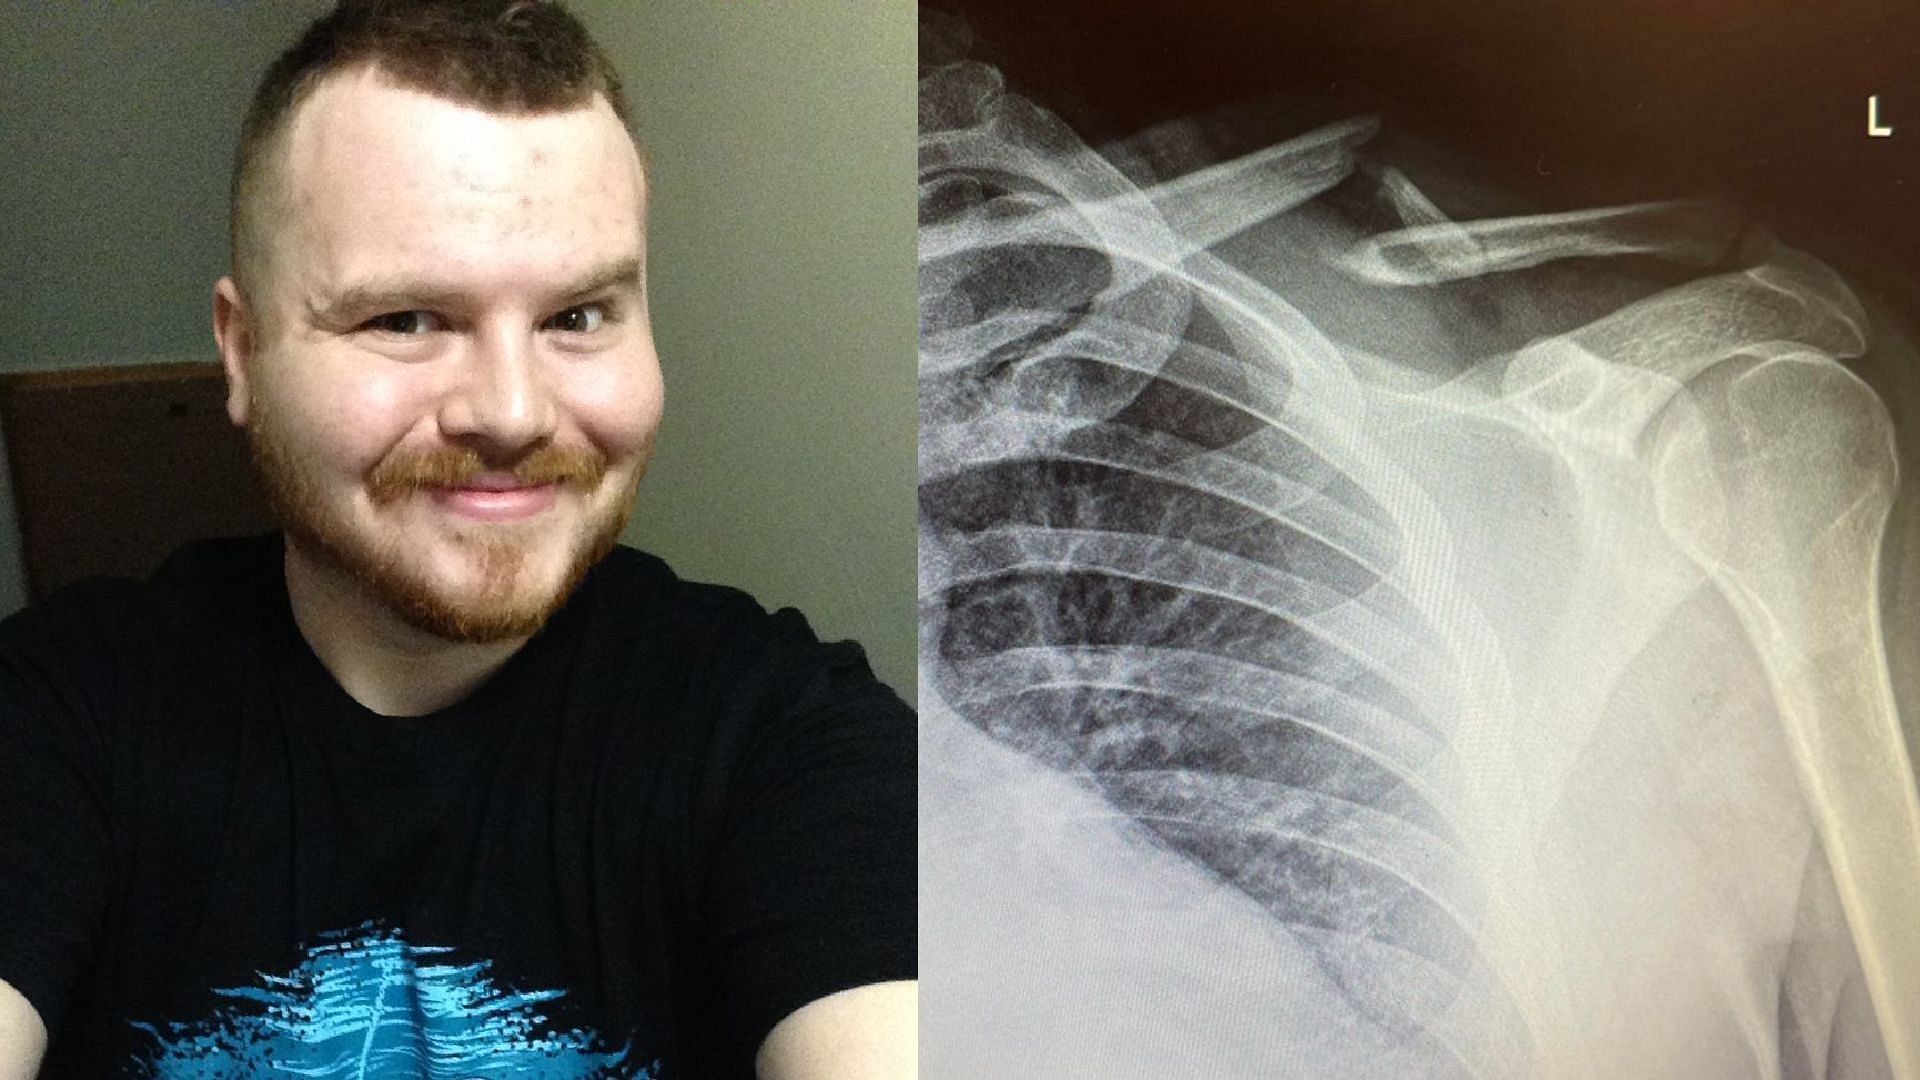 Skill Specs broke his collarbone while riding a bike on stream (Image via Skill Specs/Twitter)